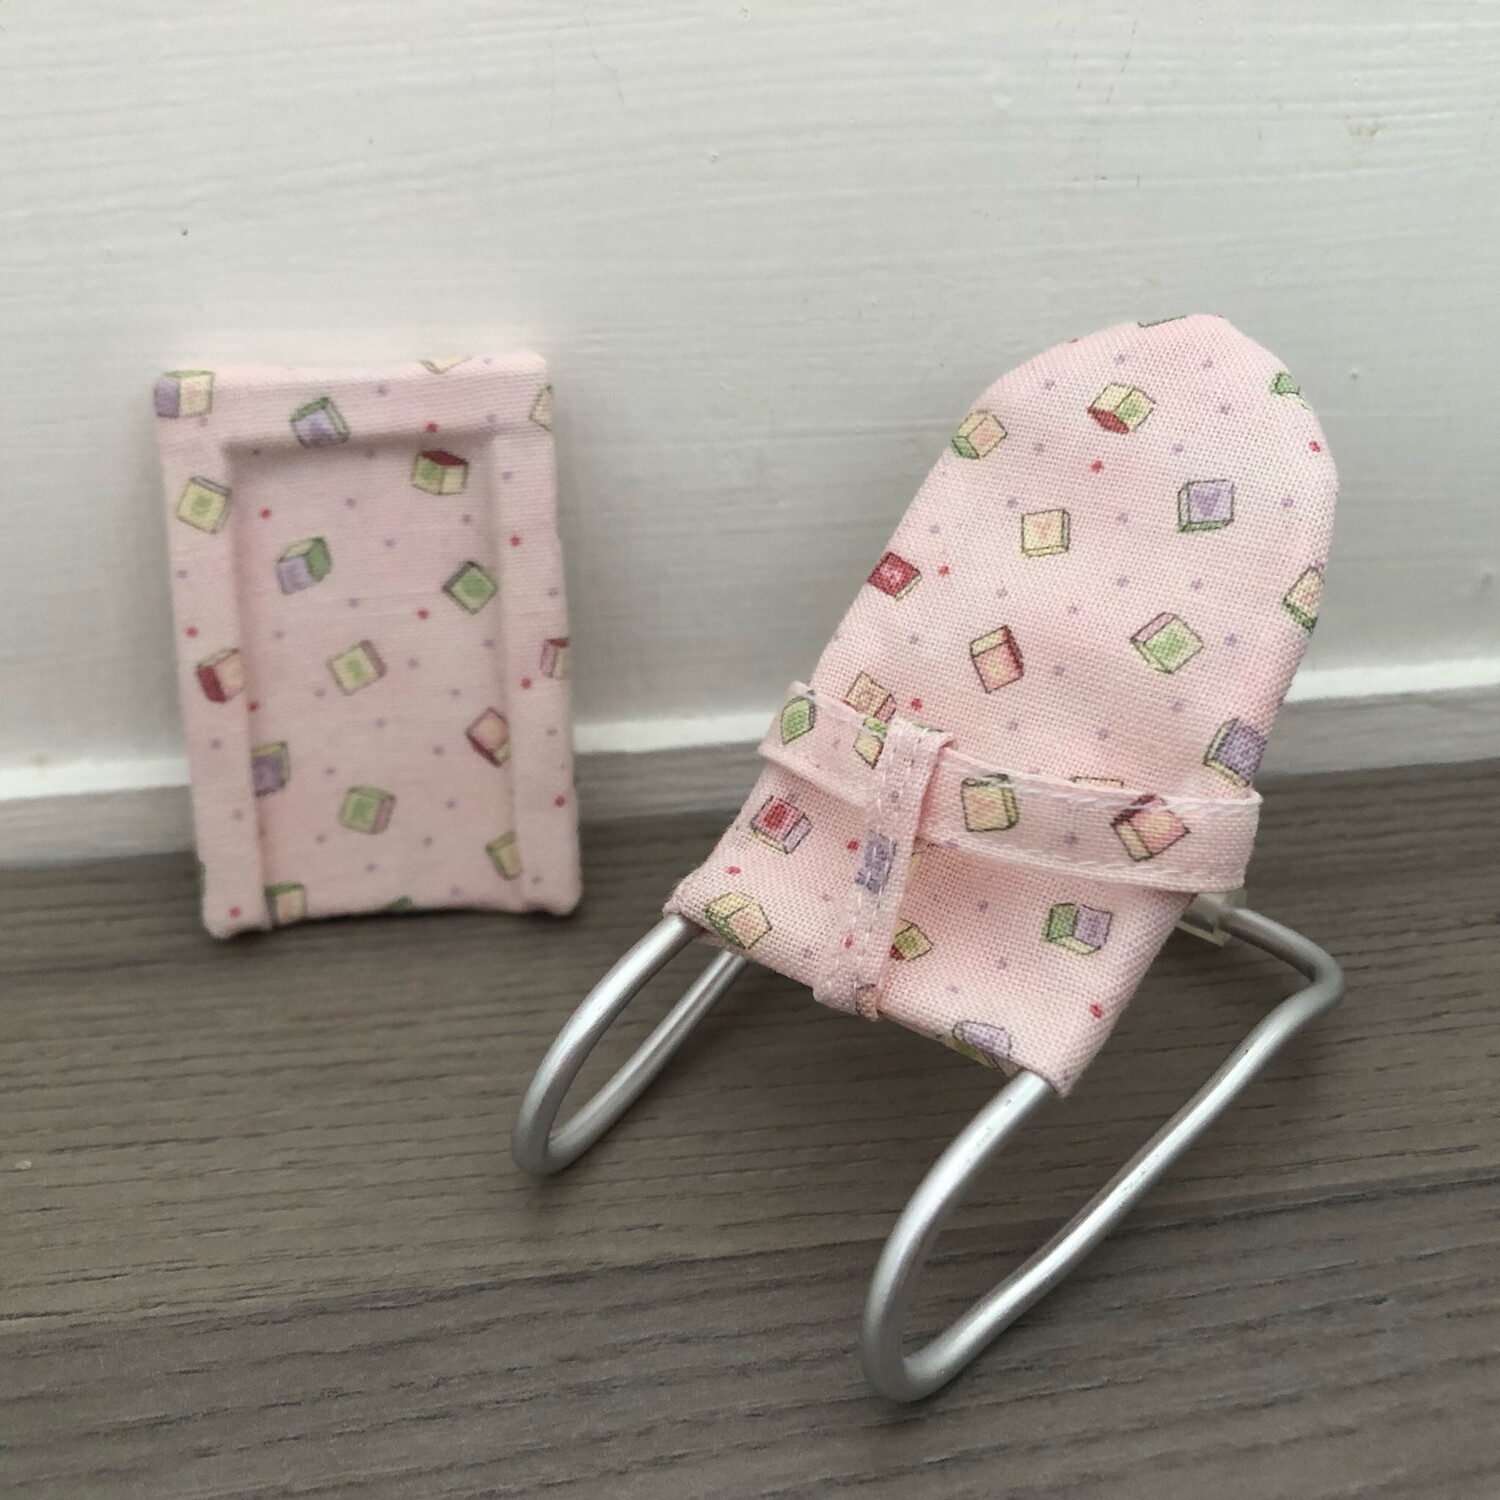 1:12 scale Bouncing Chair and Changing Mat for dolls house nursery